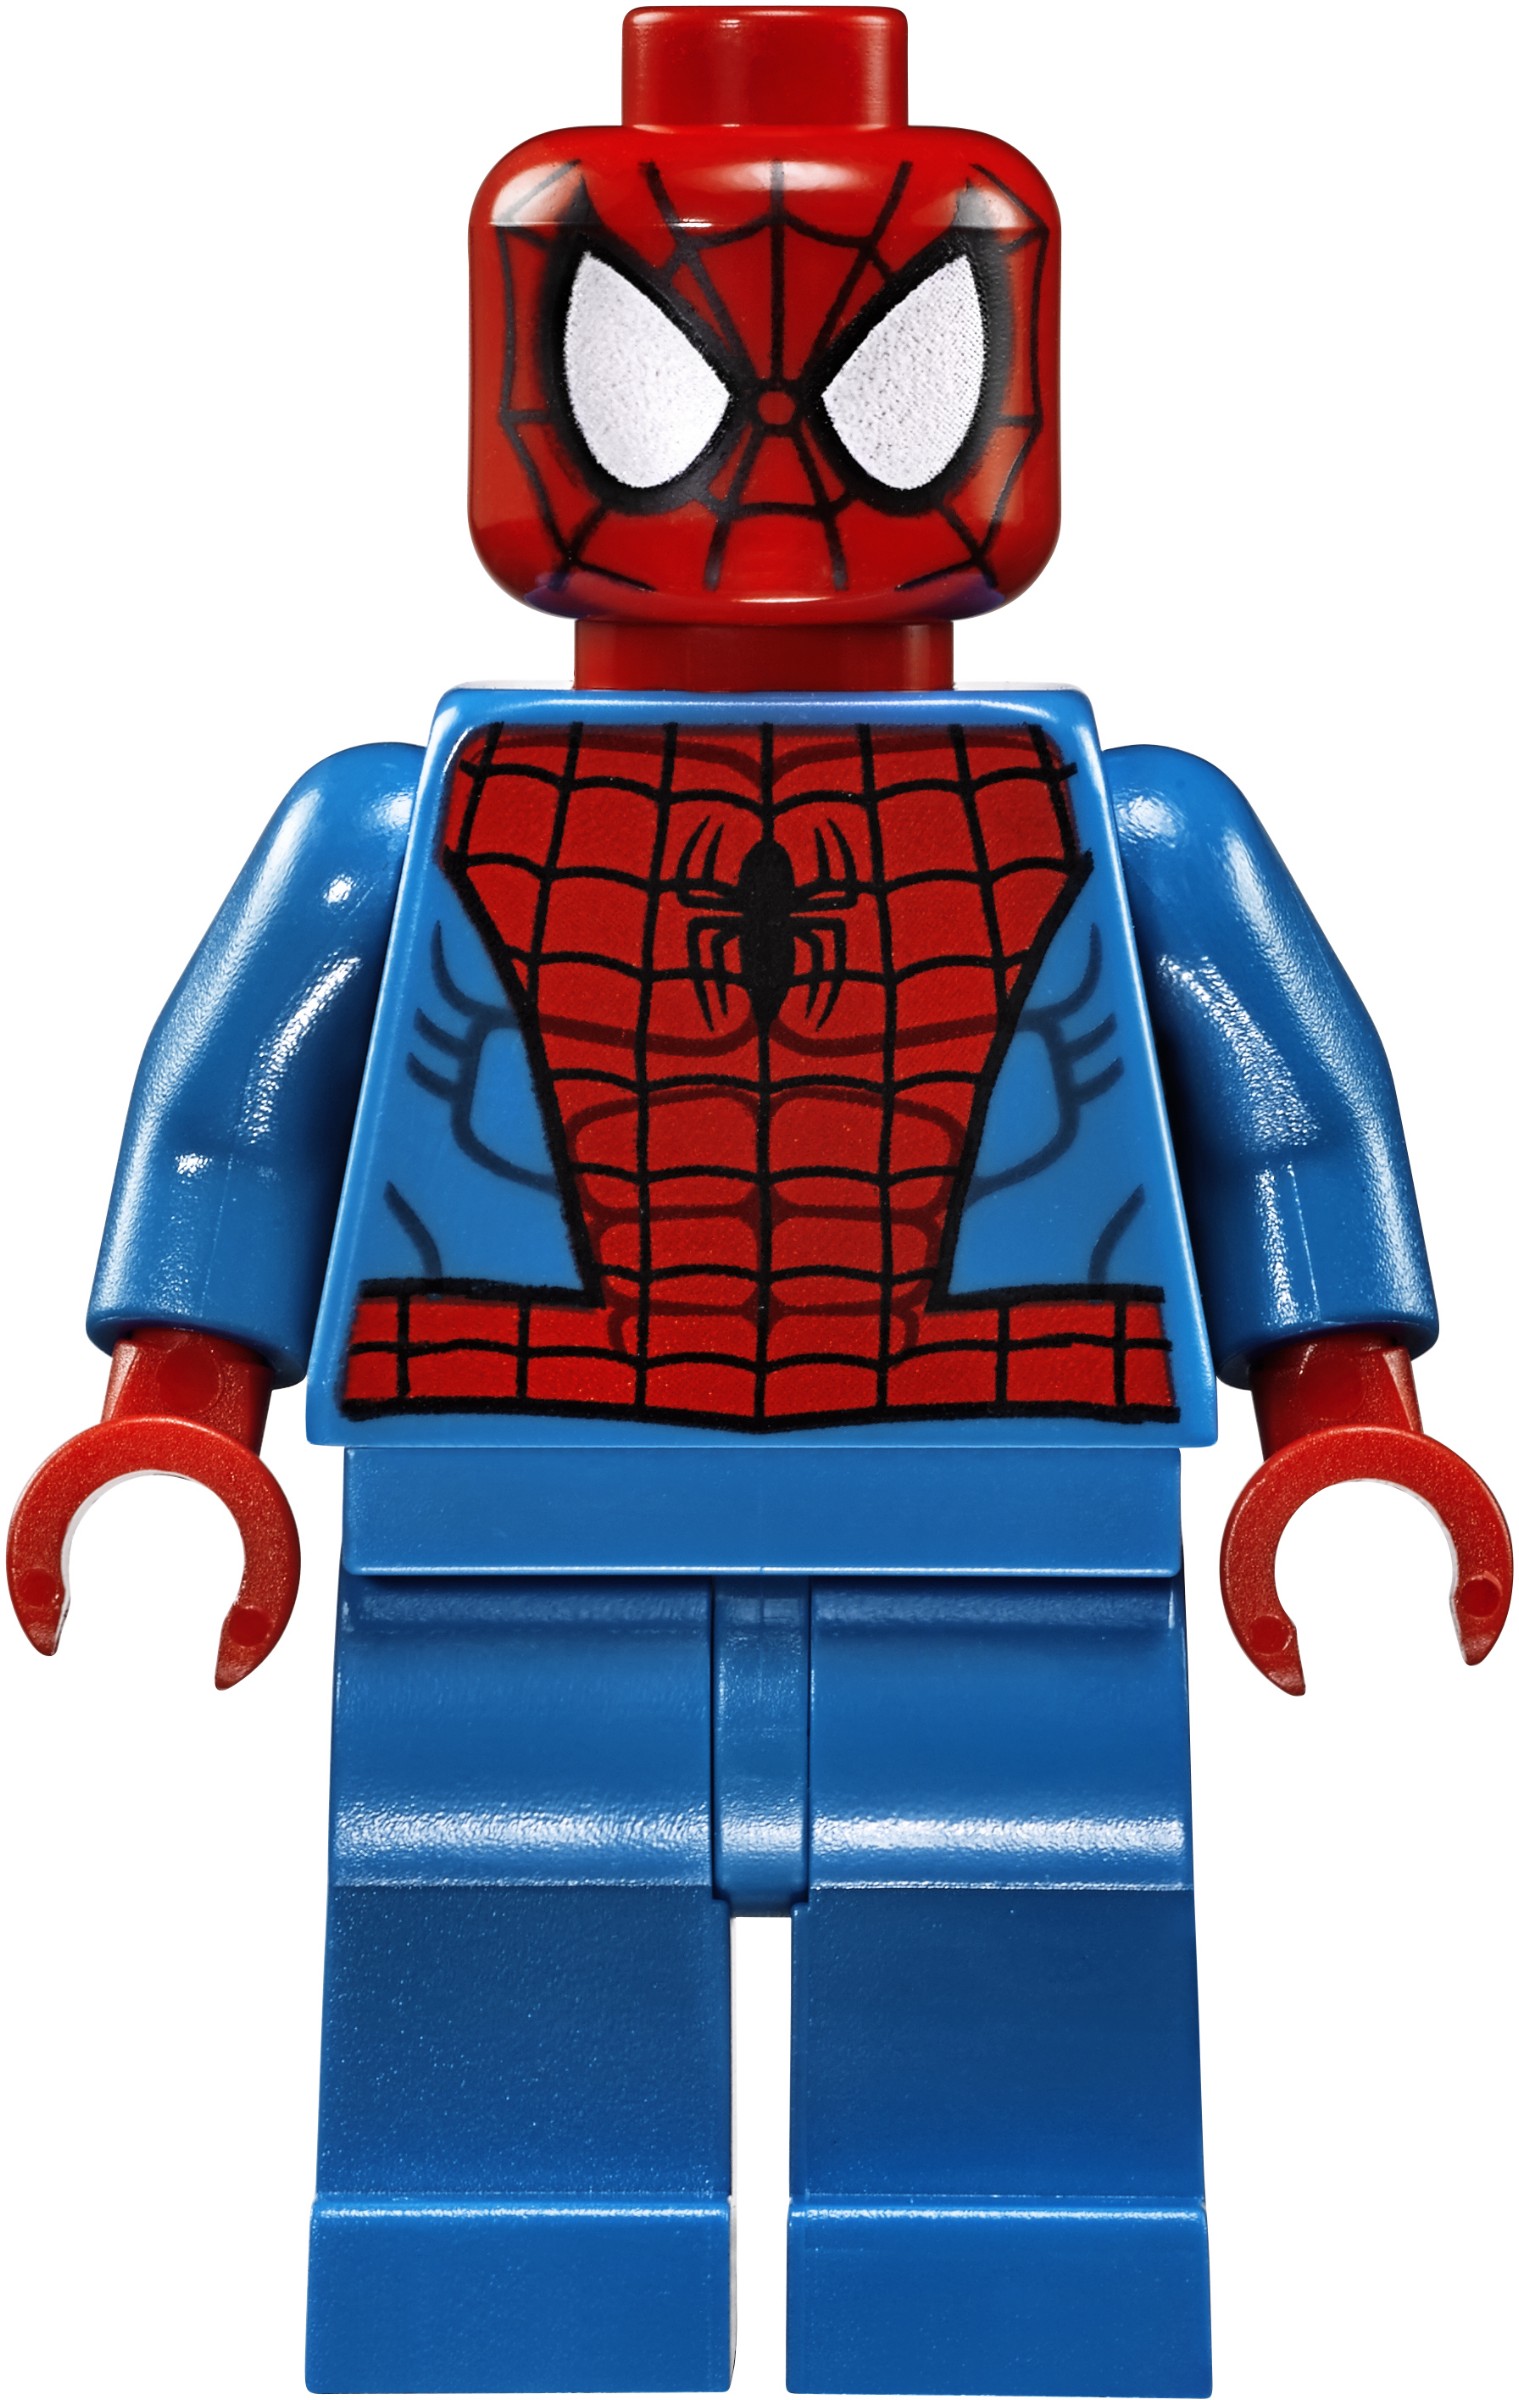 Spider-Man, Lego Marvel and DC Superheroes Wiki